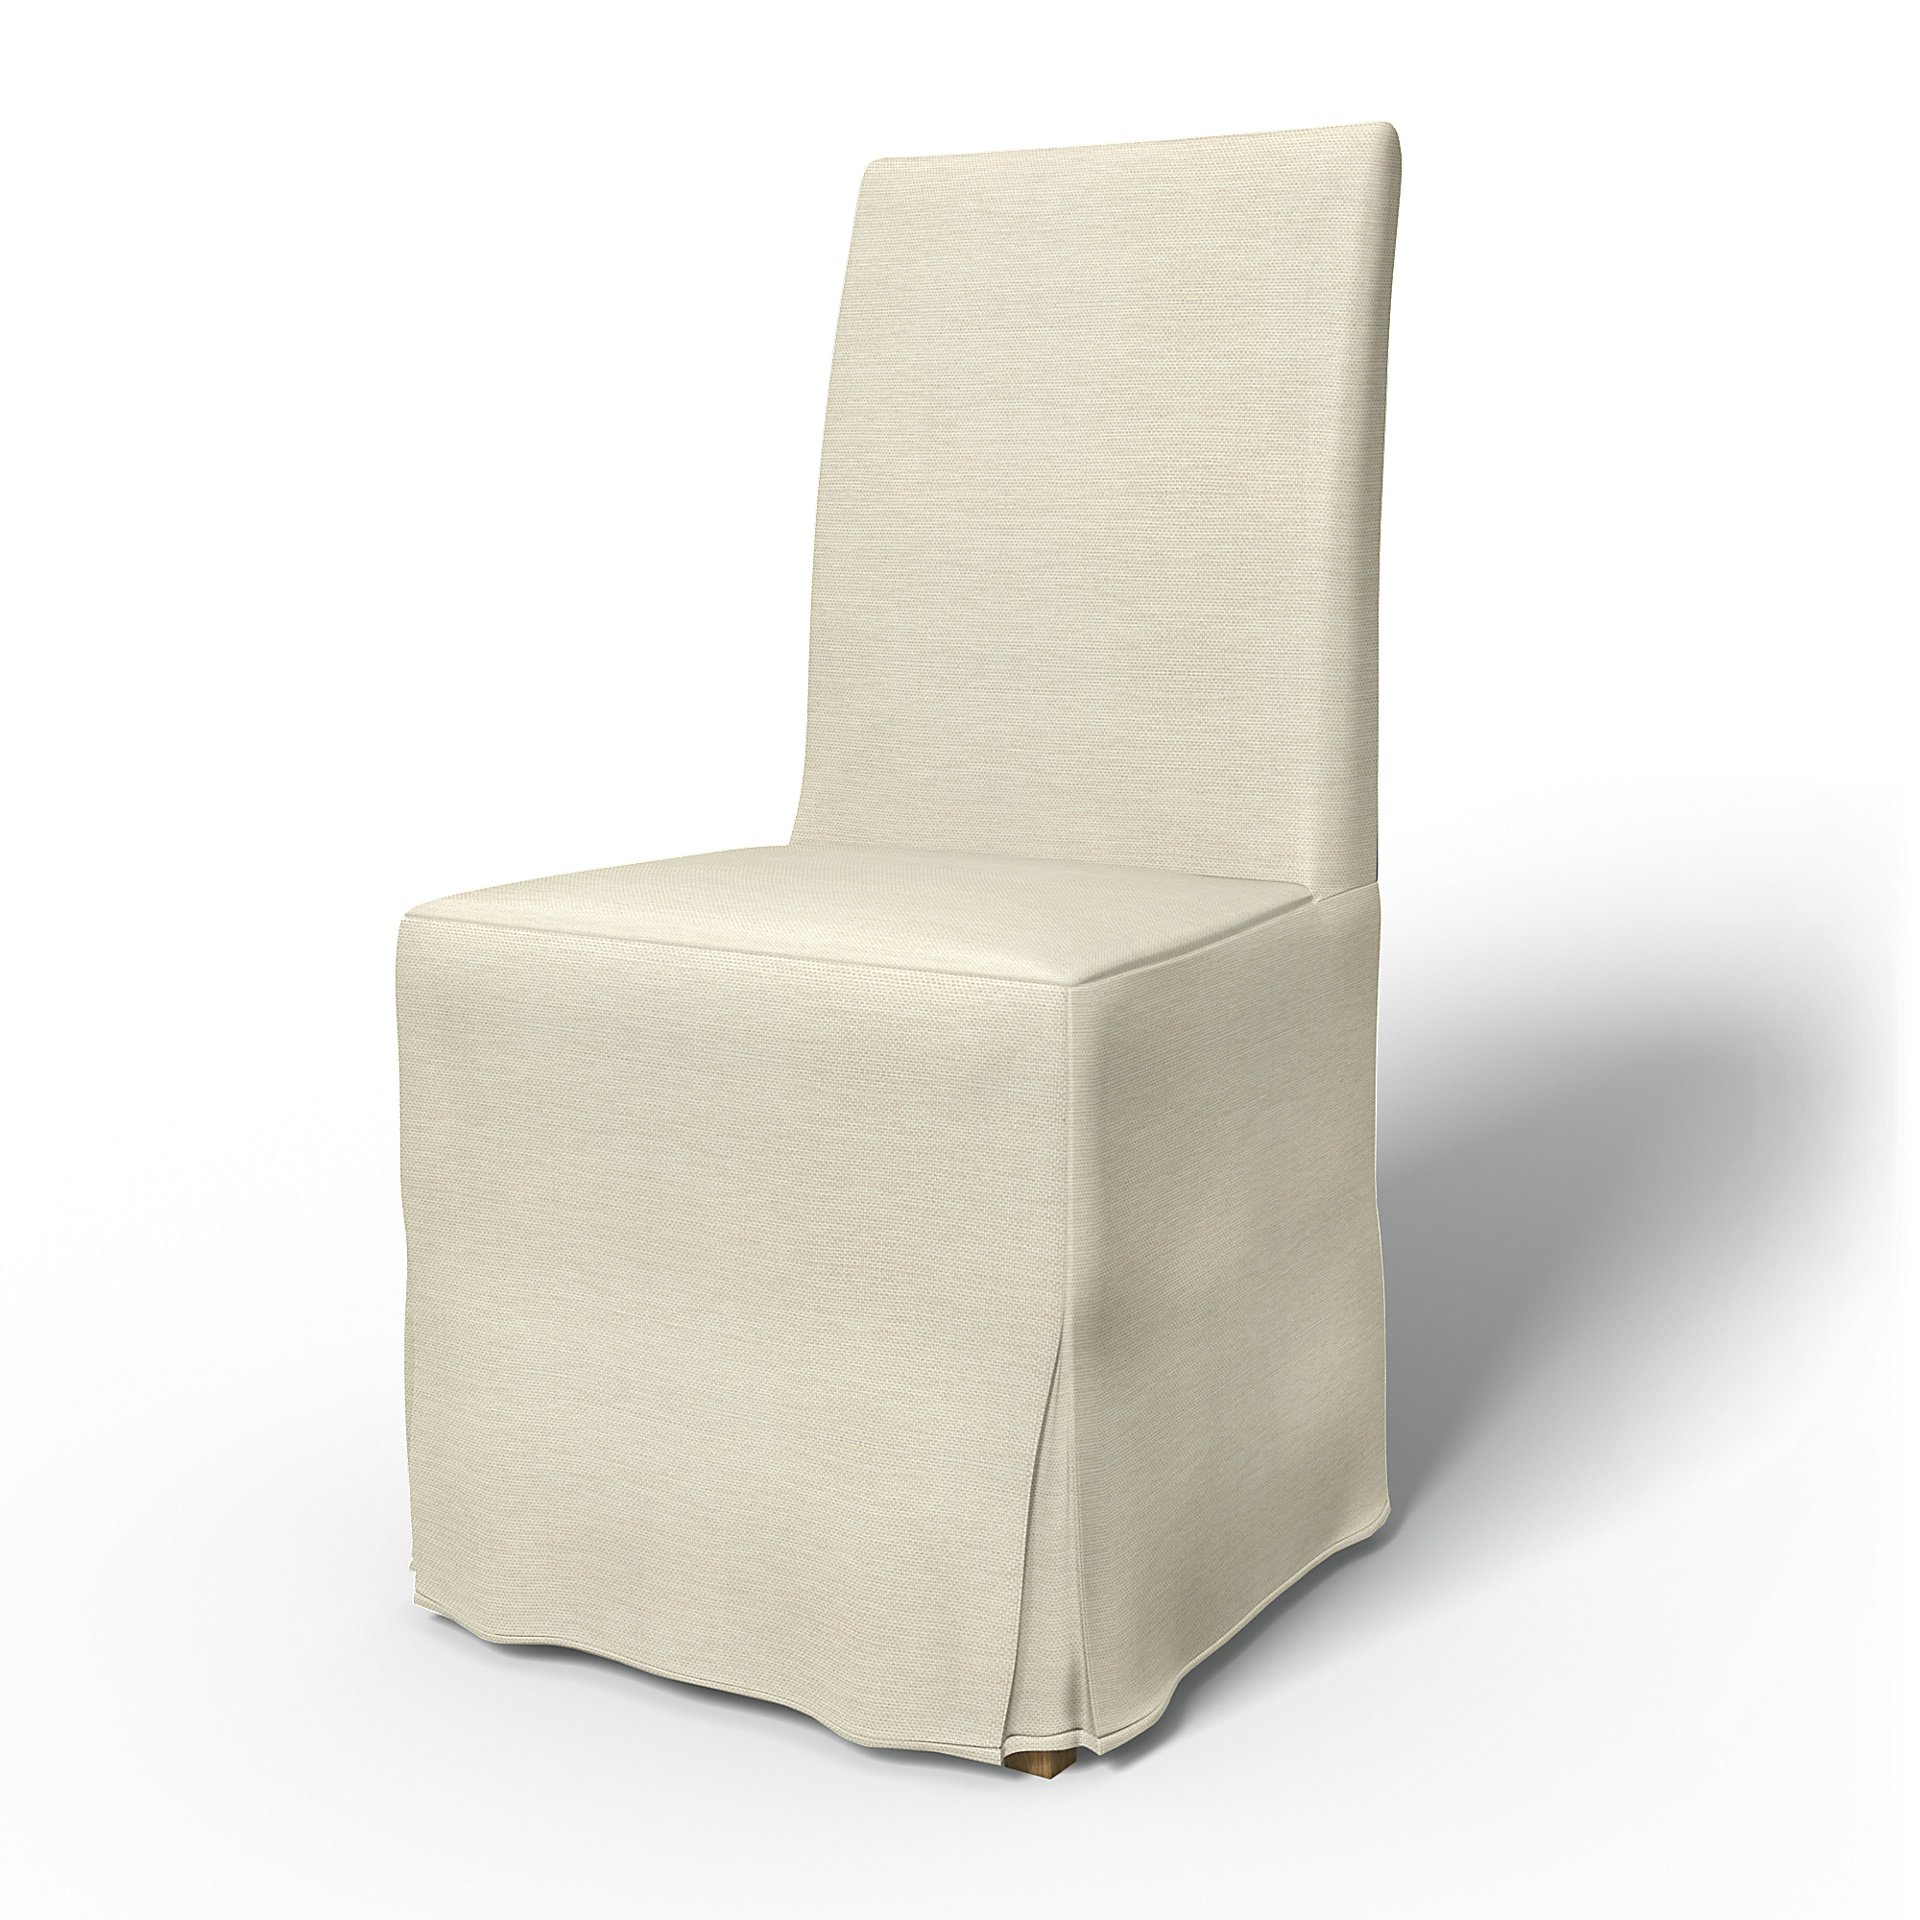 IKEA - Henriksdal Dining Chair Cover Long Skirt with Box Pleat (Standard model), Sand Beige, Cotton 